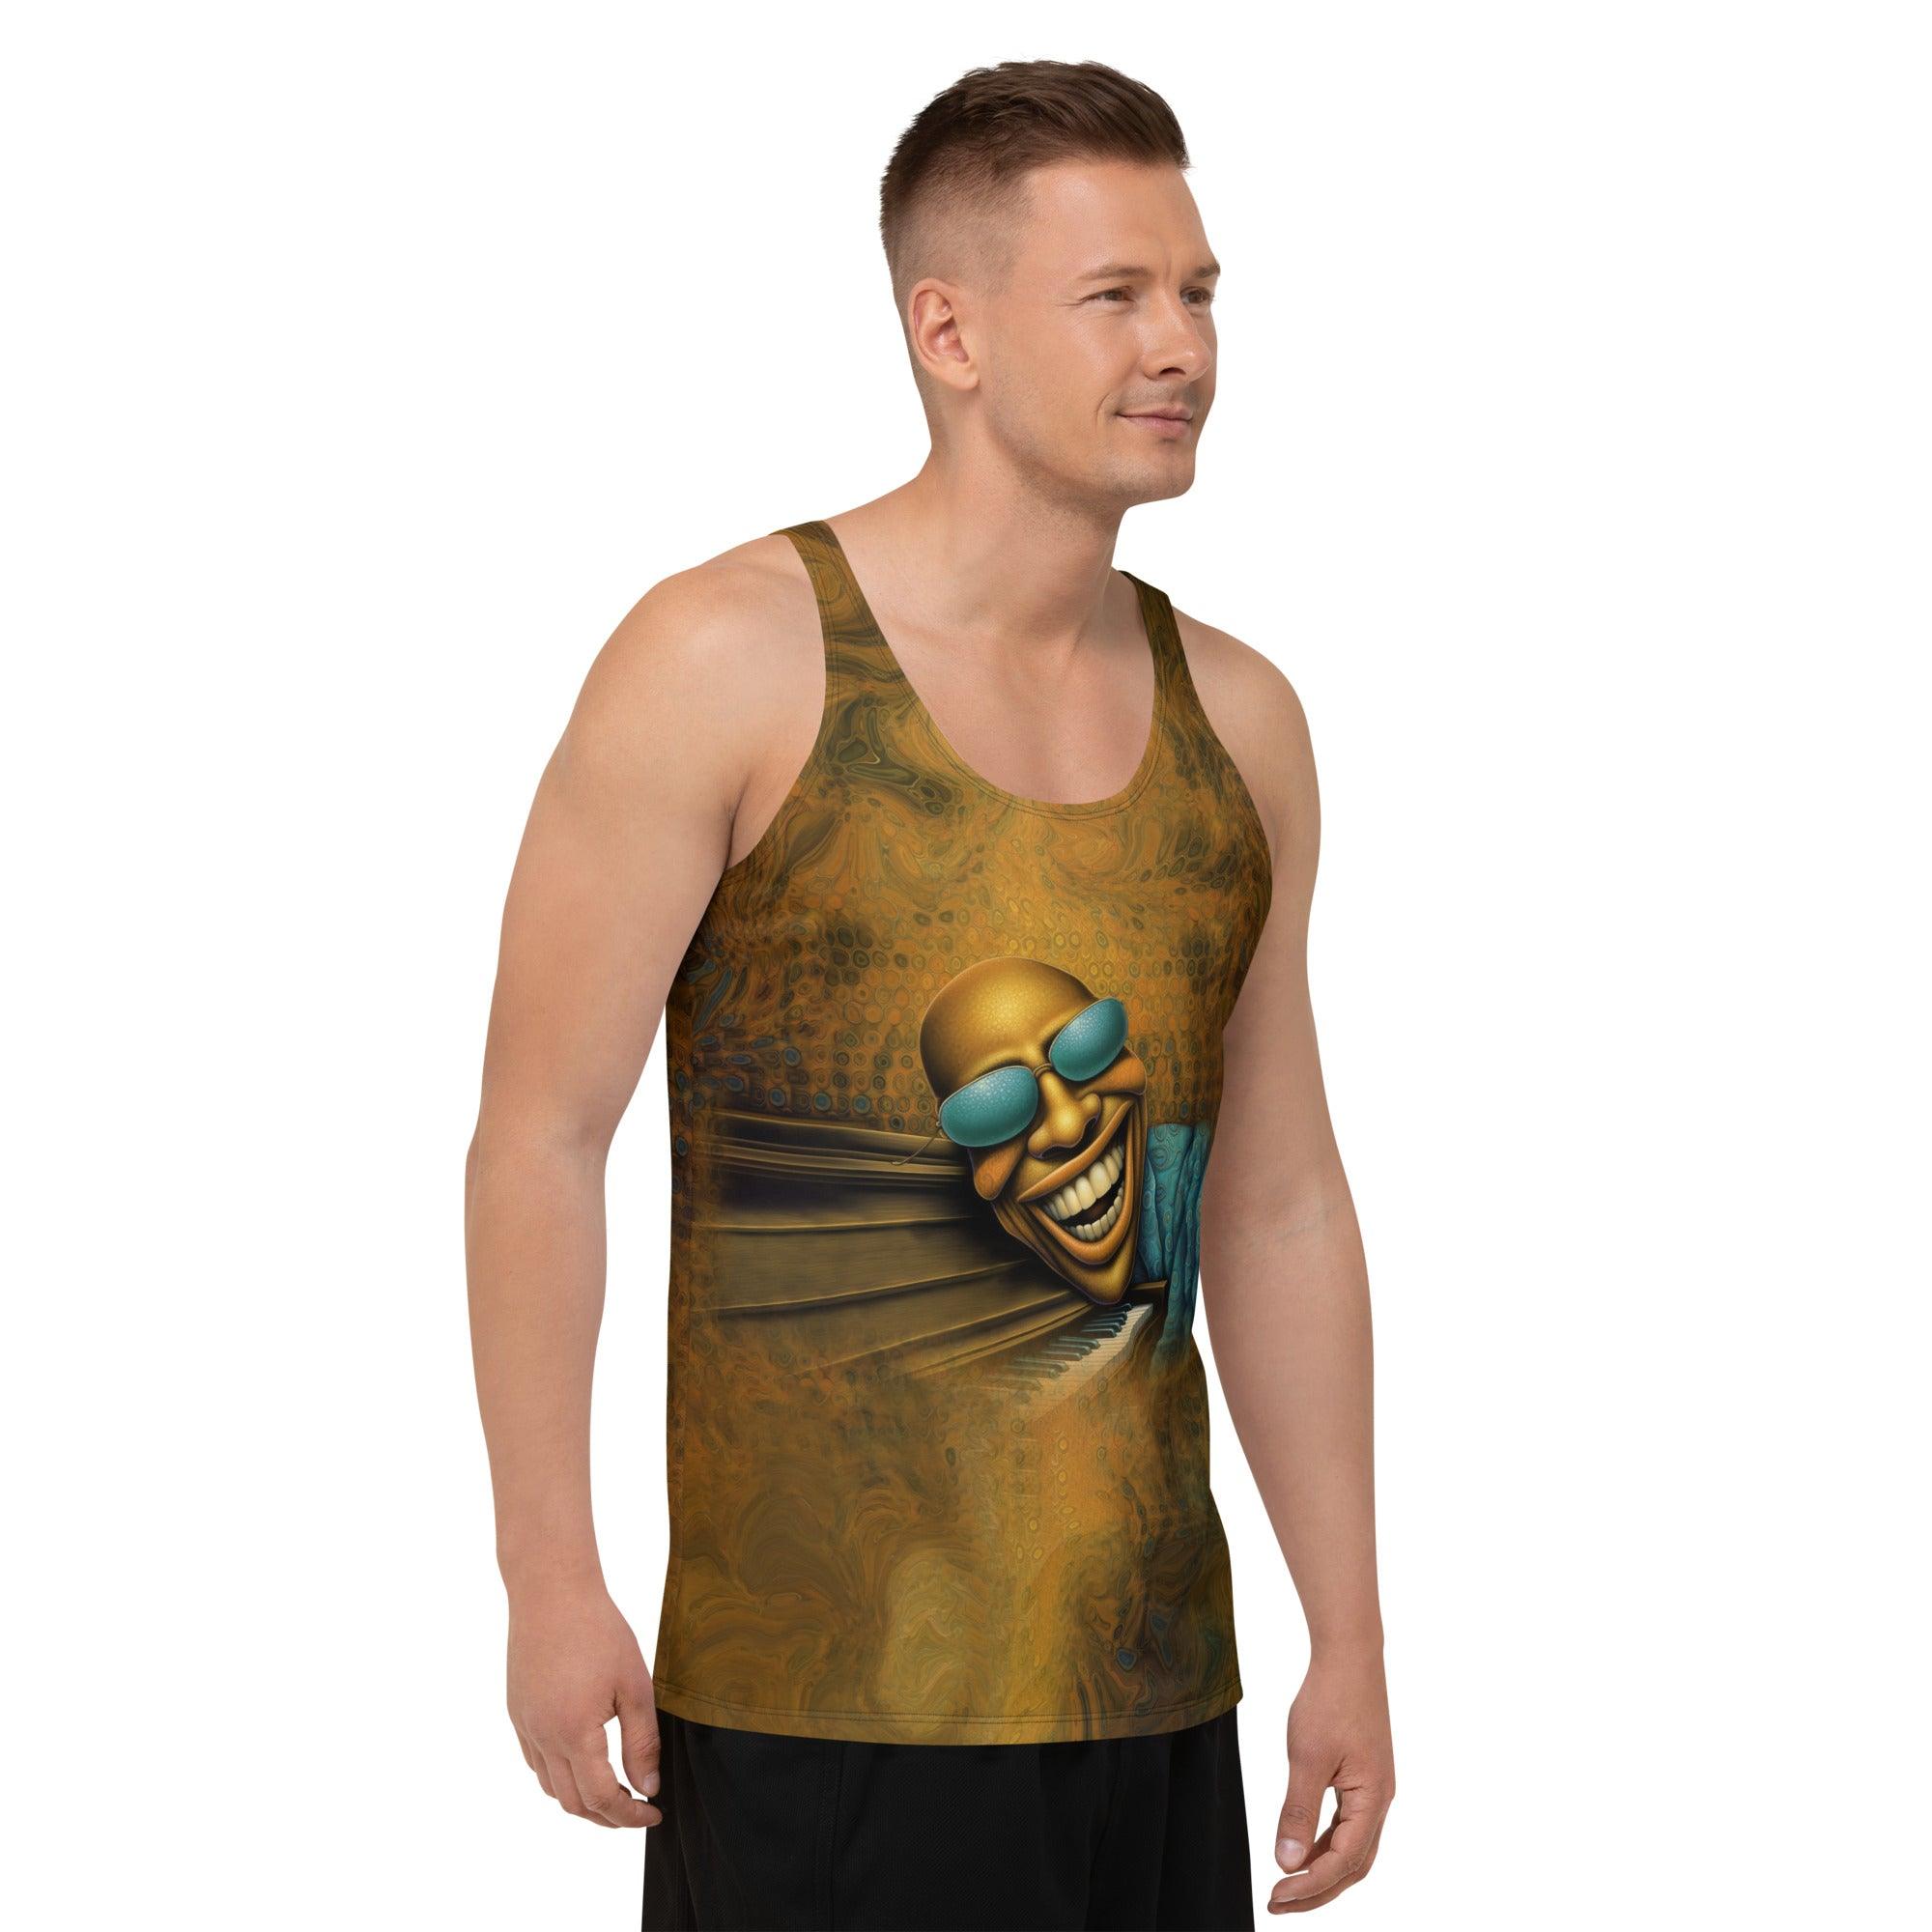 High-Quality Men's Tank Top with Reflective Design.